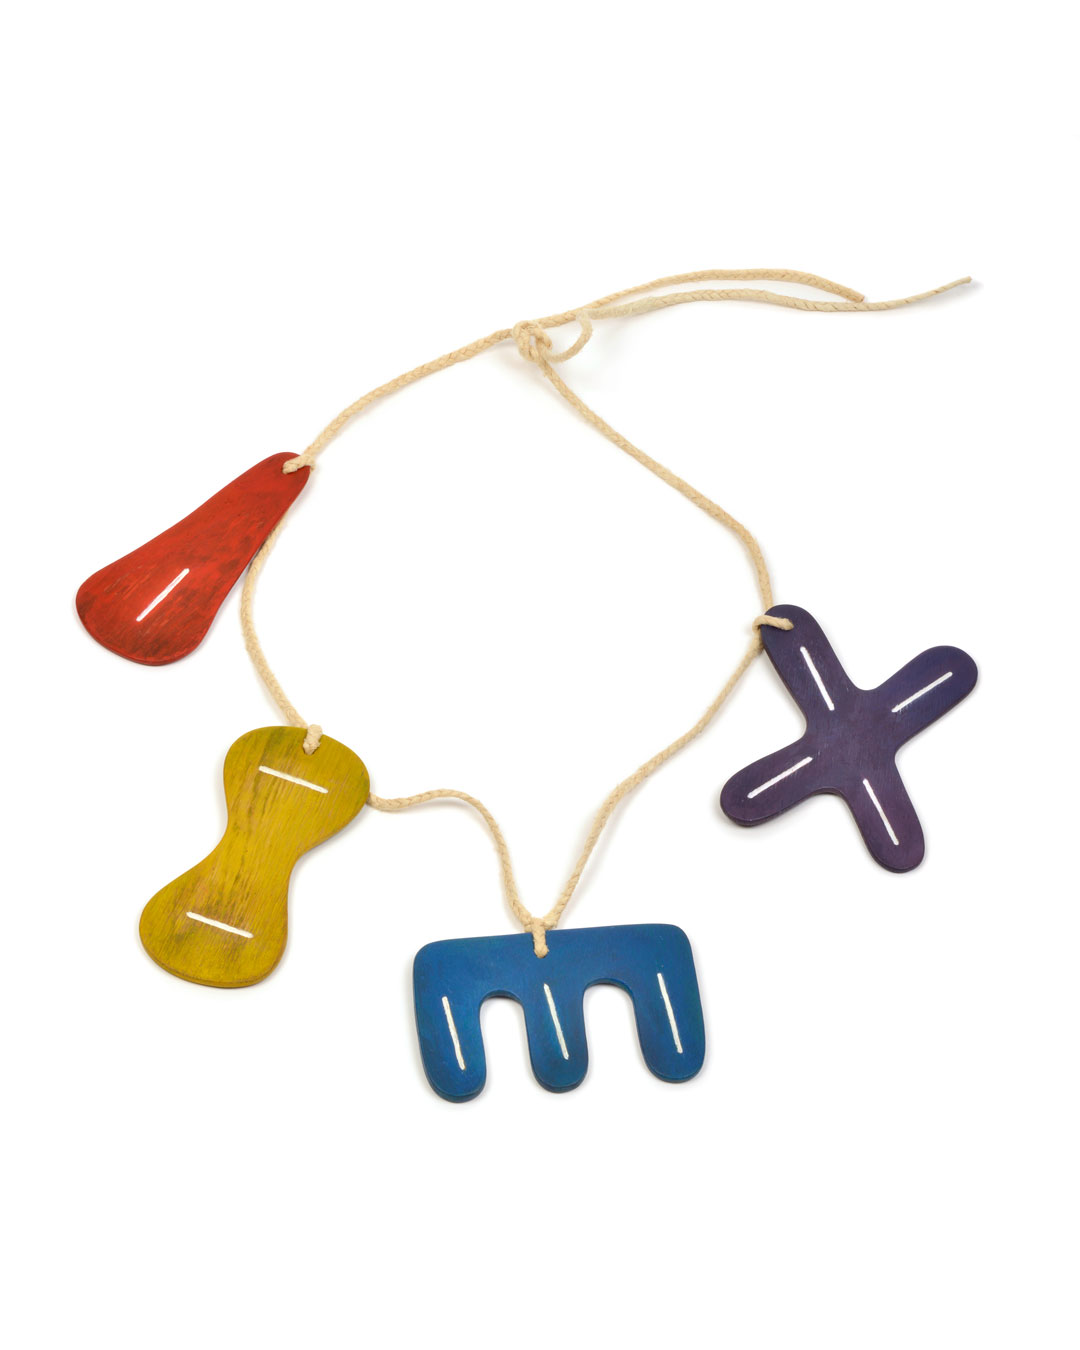 Julia Walter, 1, 2, 3, 4, 2019, necklace; 200-year-old Japanese oak, paint, handmade flax string, 700 x 460 x 15 mm, € 1940